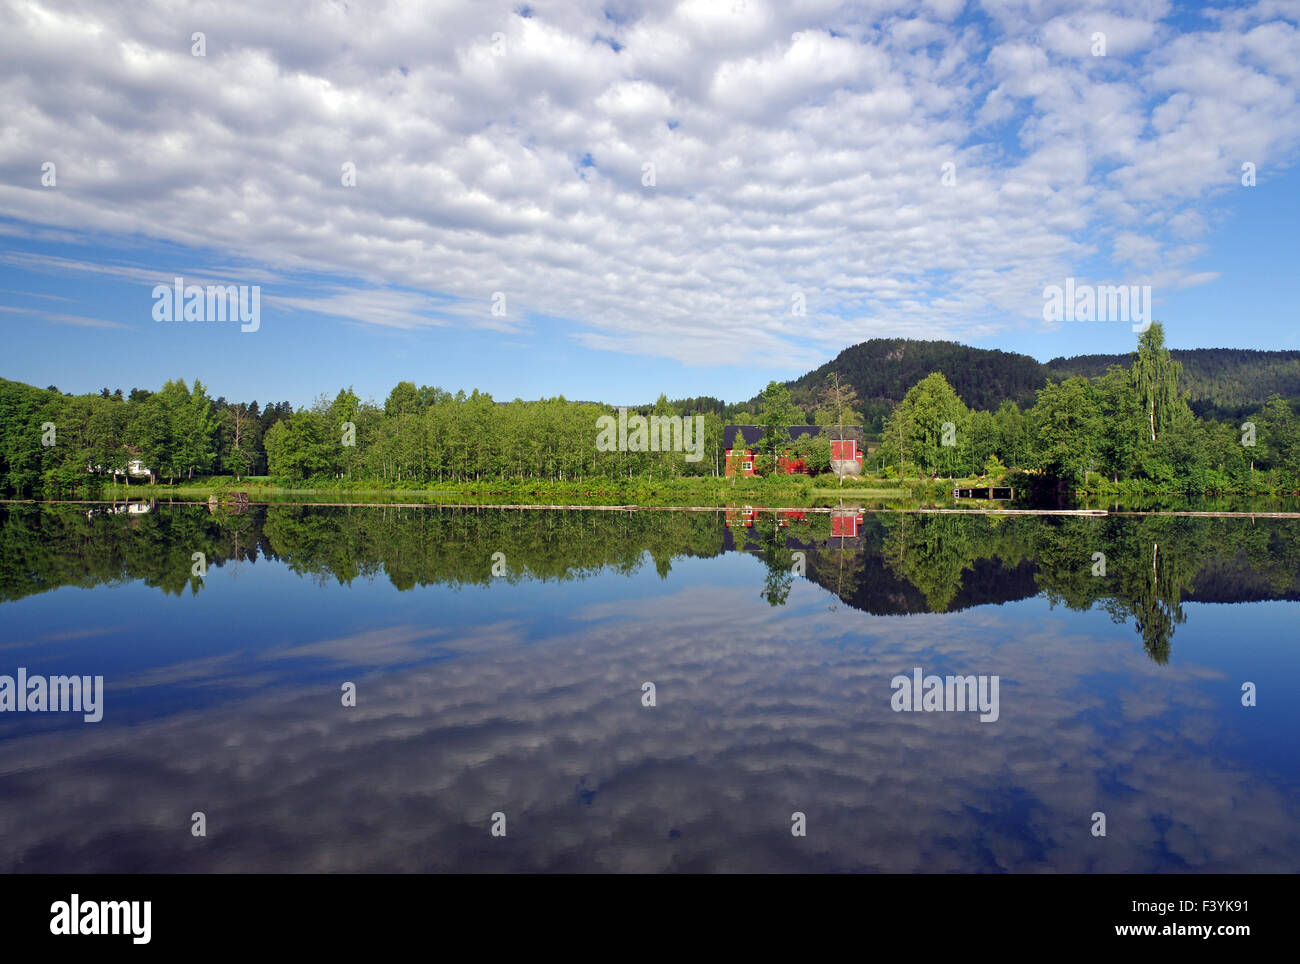 calm day at the telemark channnel Stock Photo